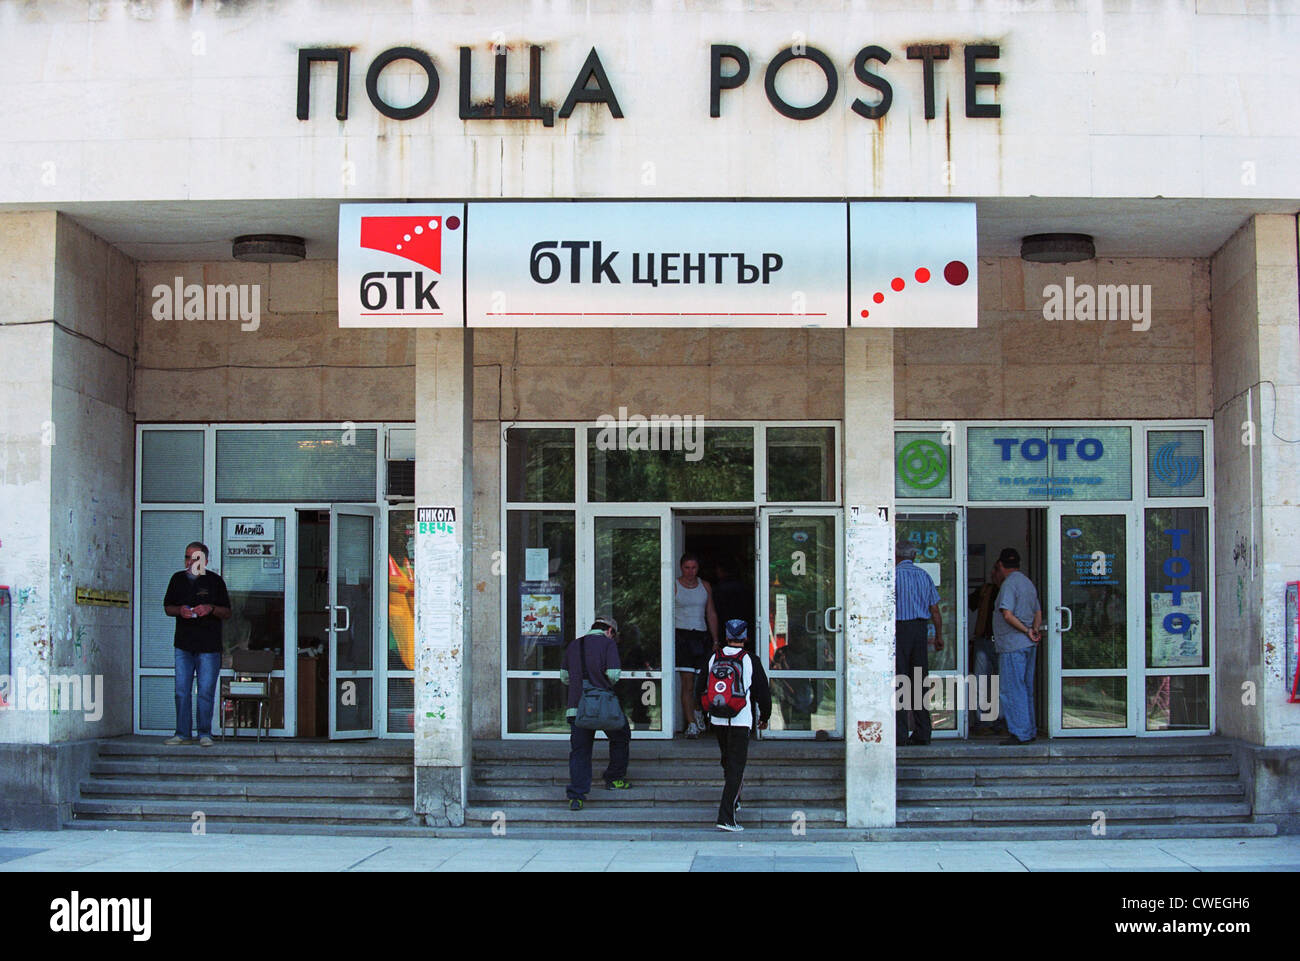 Bulgarian Post Office with a BTC center in Plovdiv, Bulgaria Stock Photo